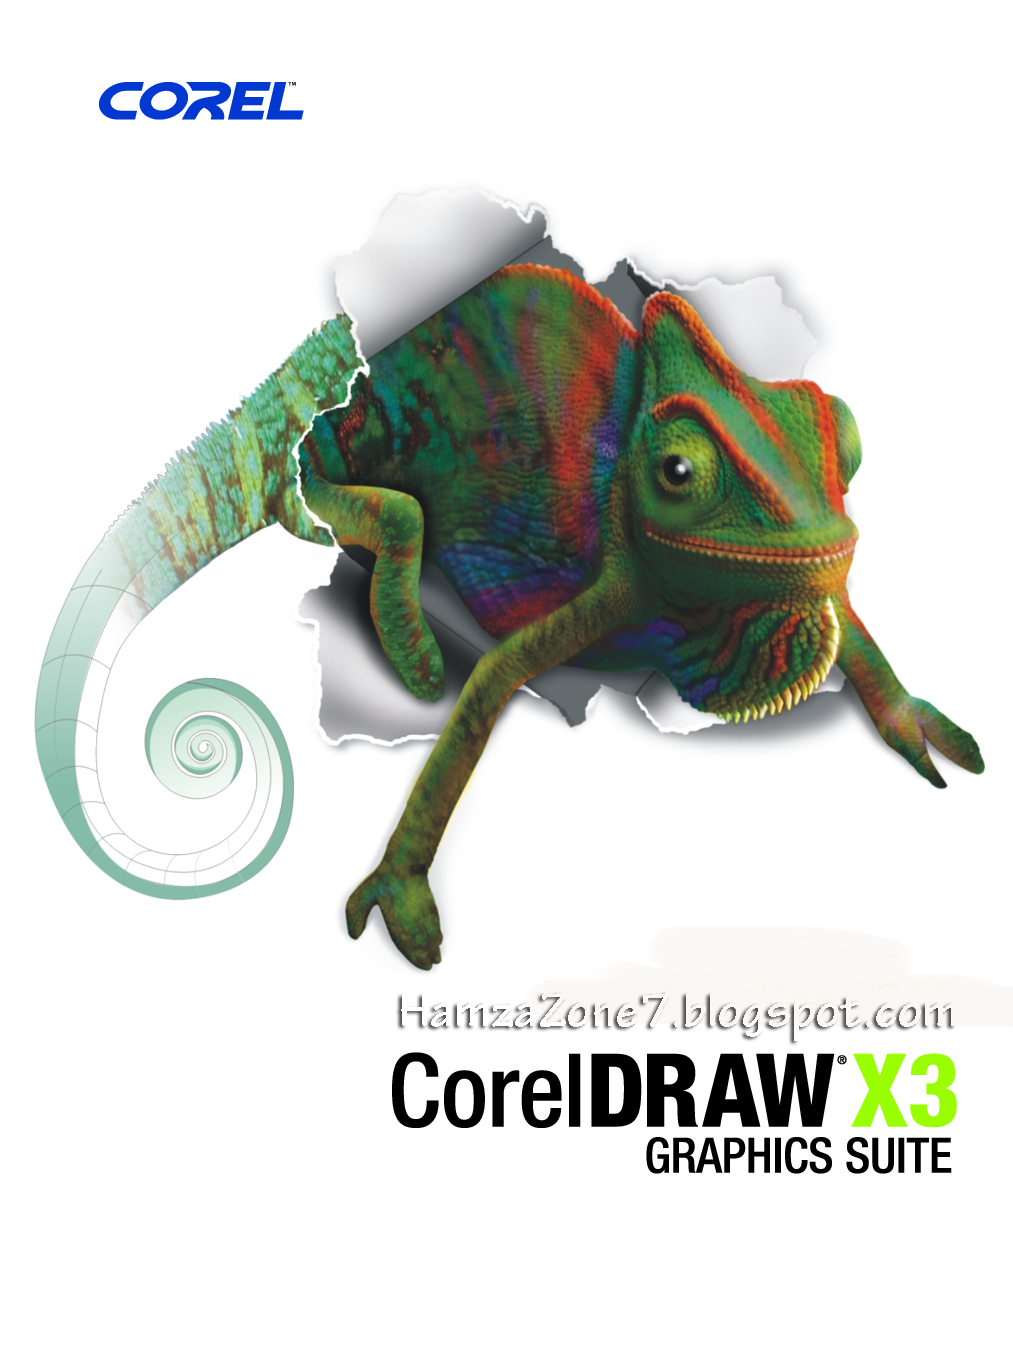 coreldraw x3 free download full version with crack